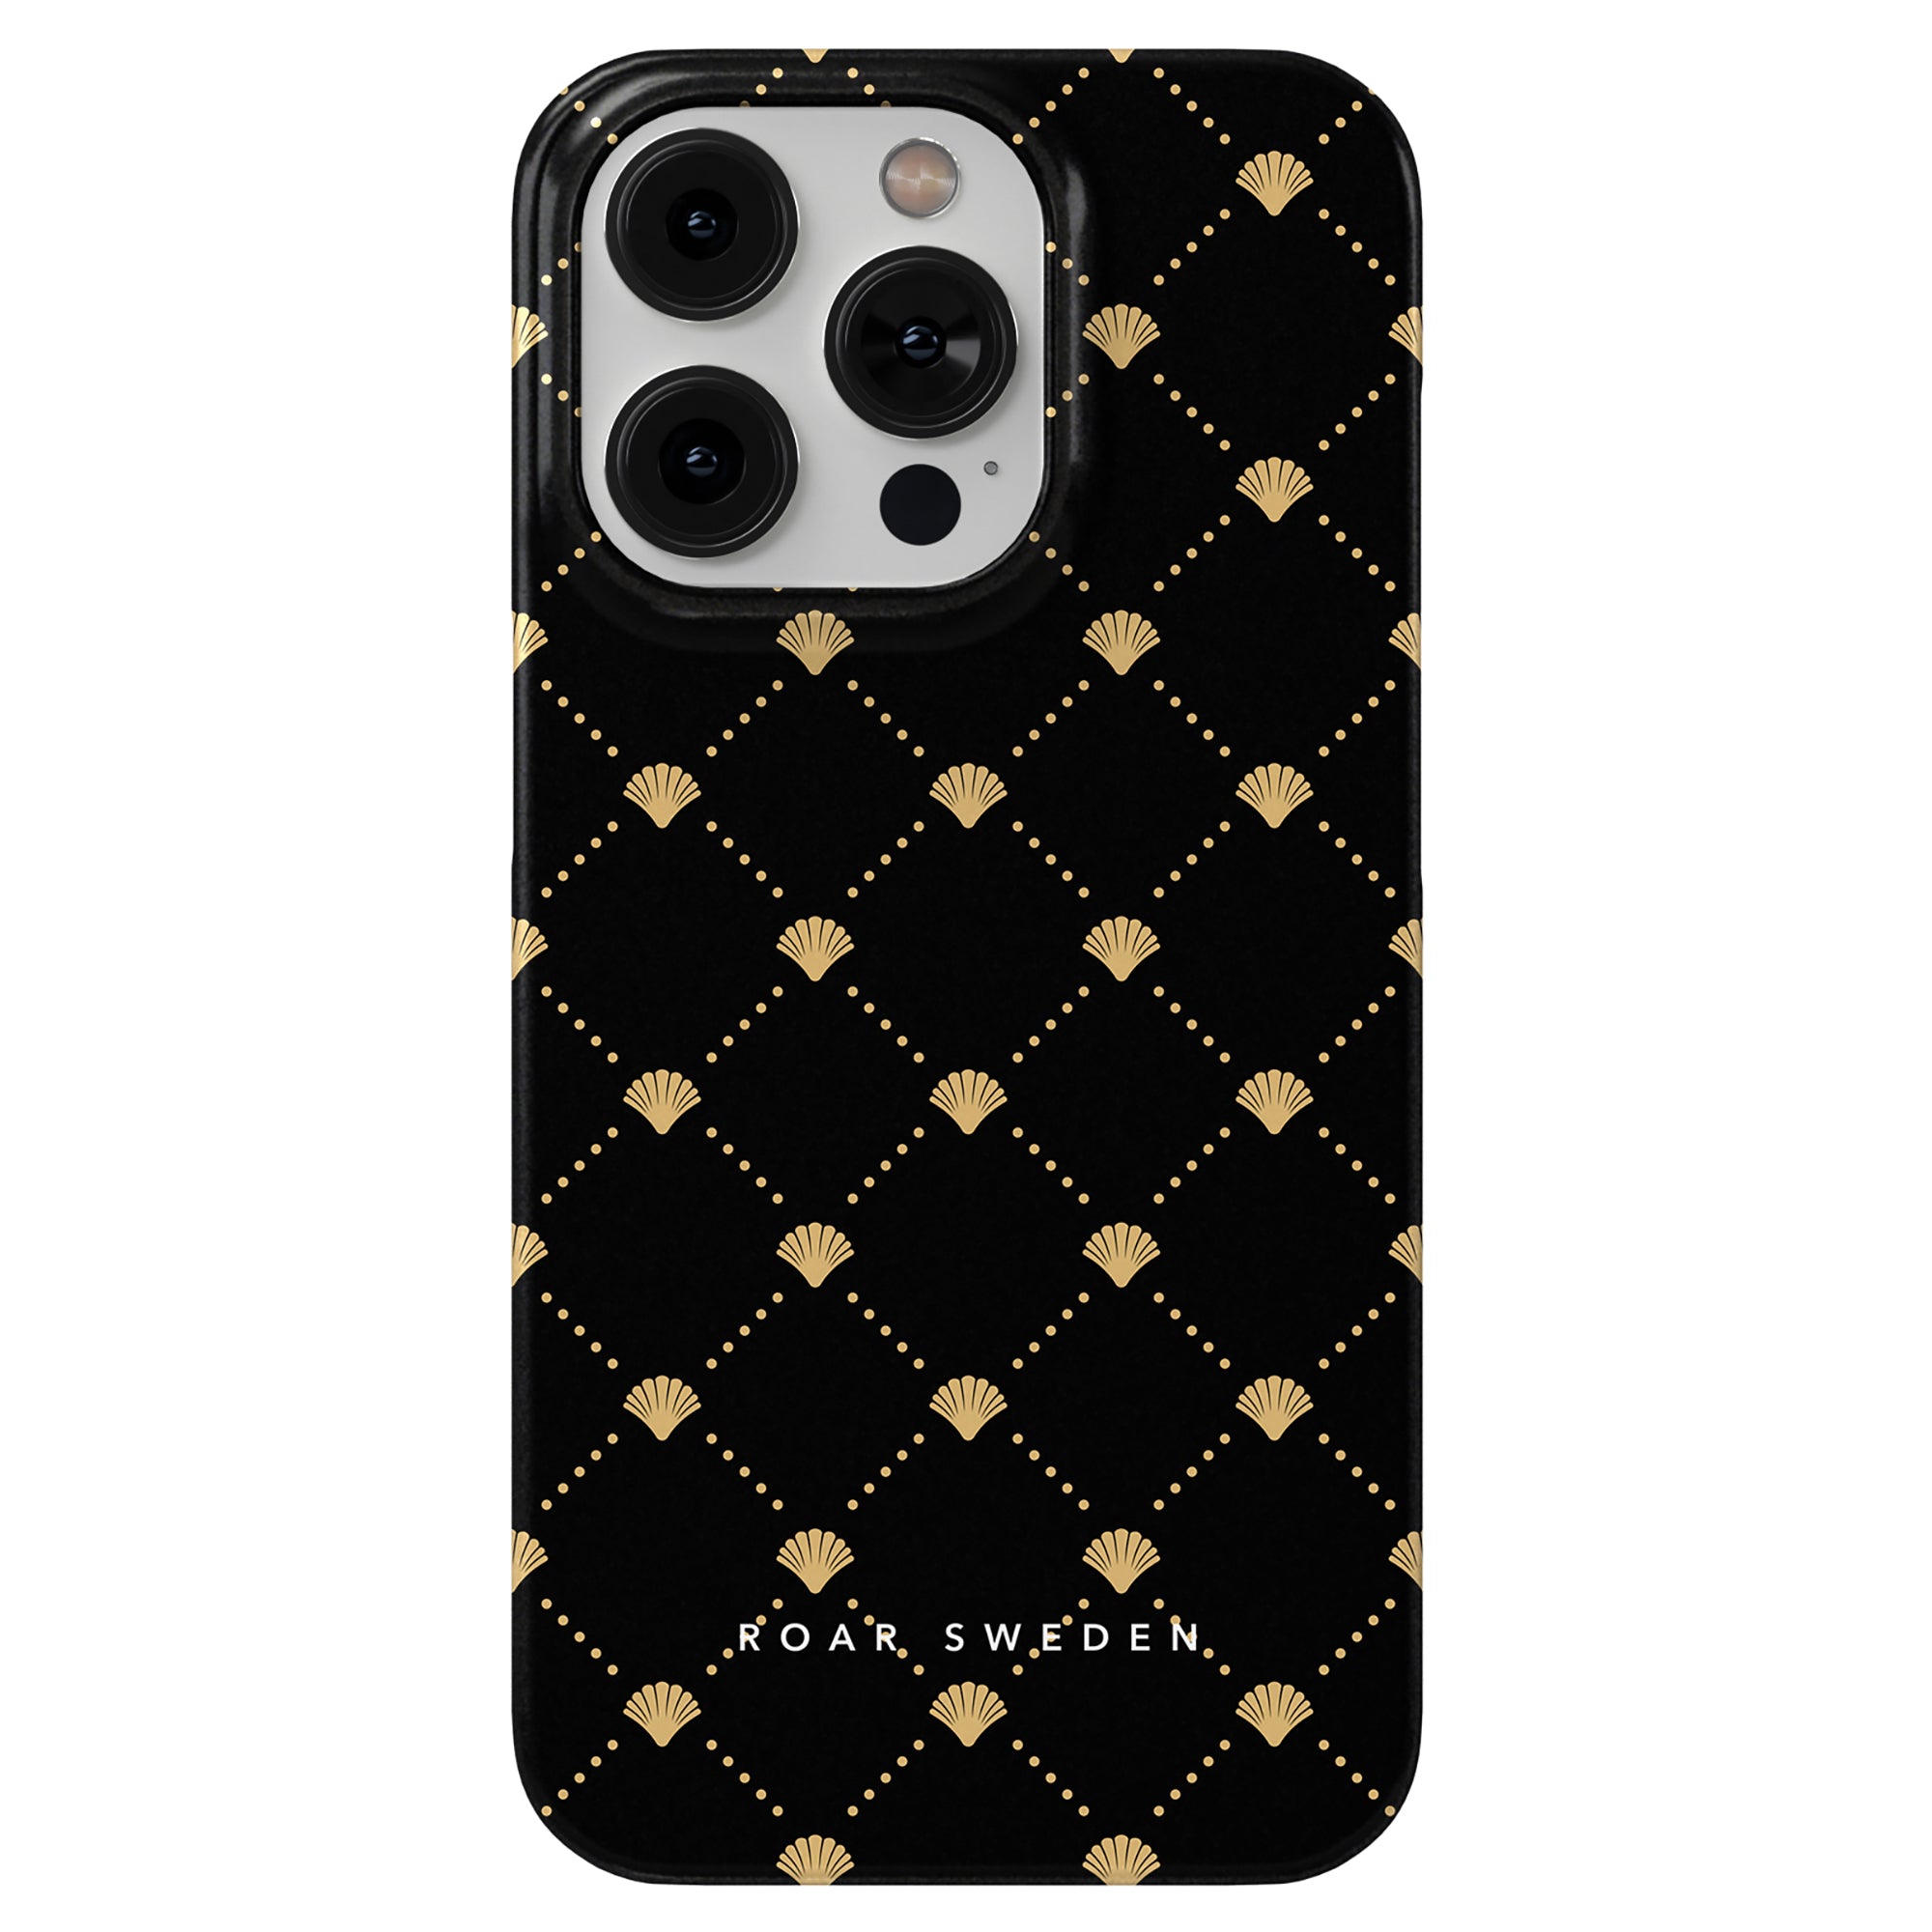 The Luxe Shells Black - Slim case features a gold geometric pattern with "ROAR SWEDEN" at the bottom, blending style and sophistication.